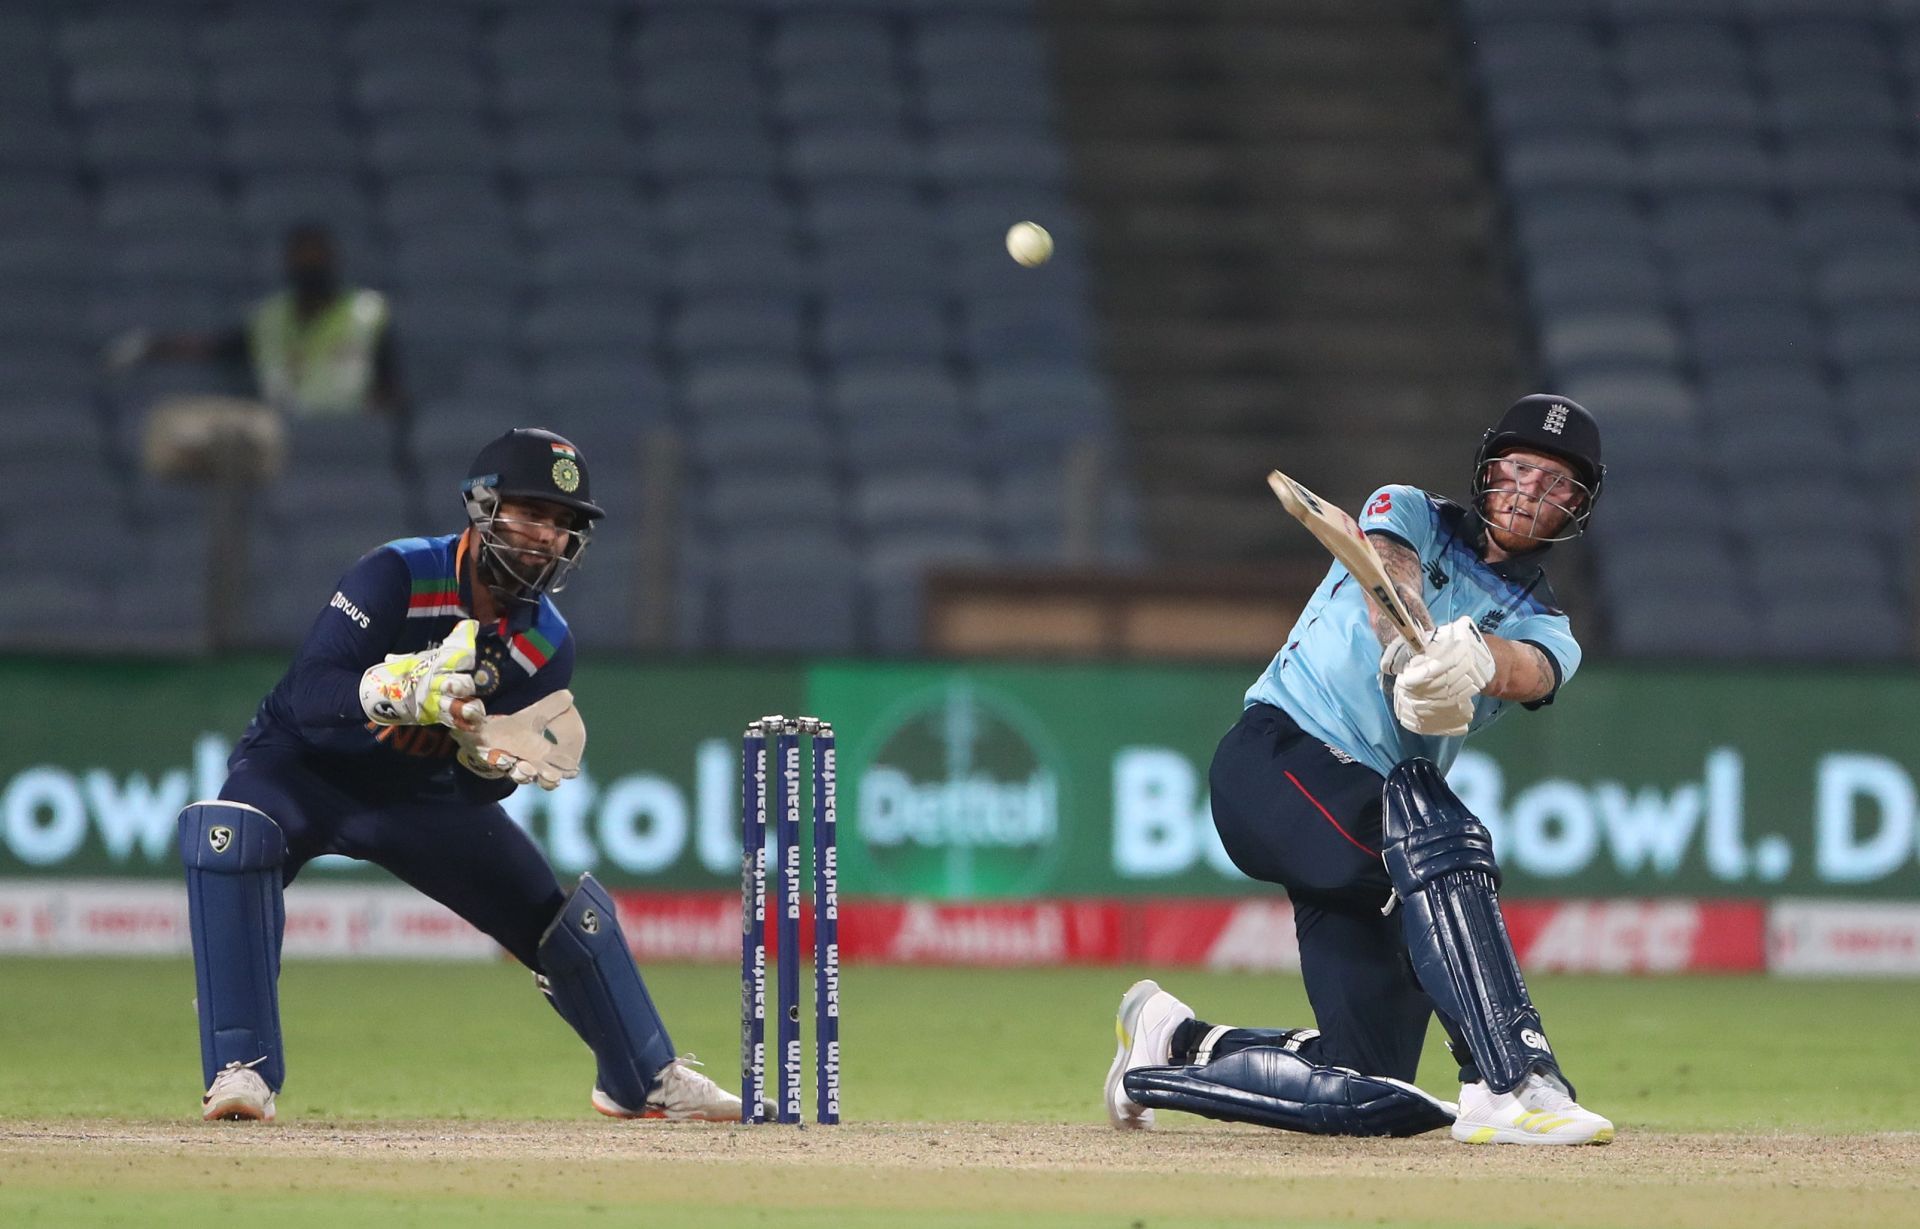 Ben Stokes hits during the 2nd ODI against India. Pic: Getty Images